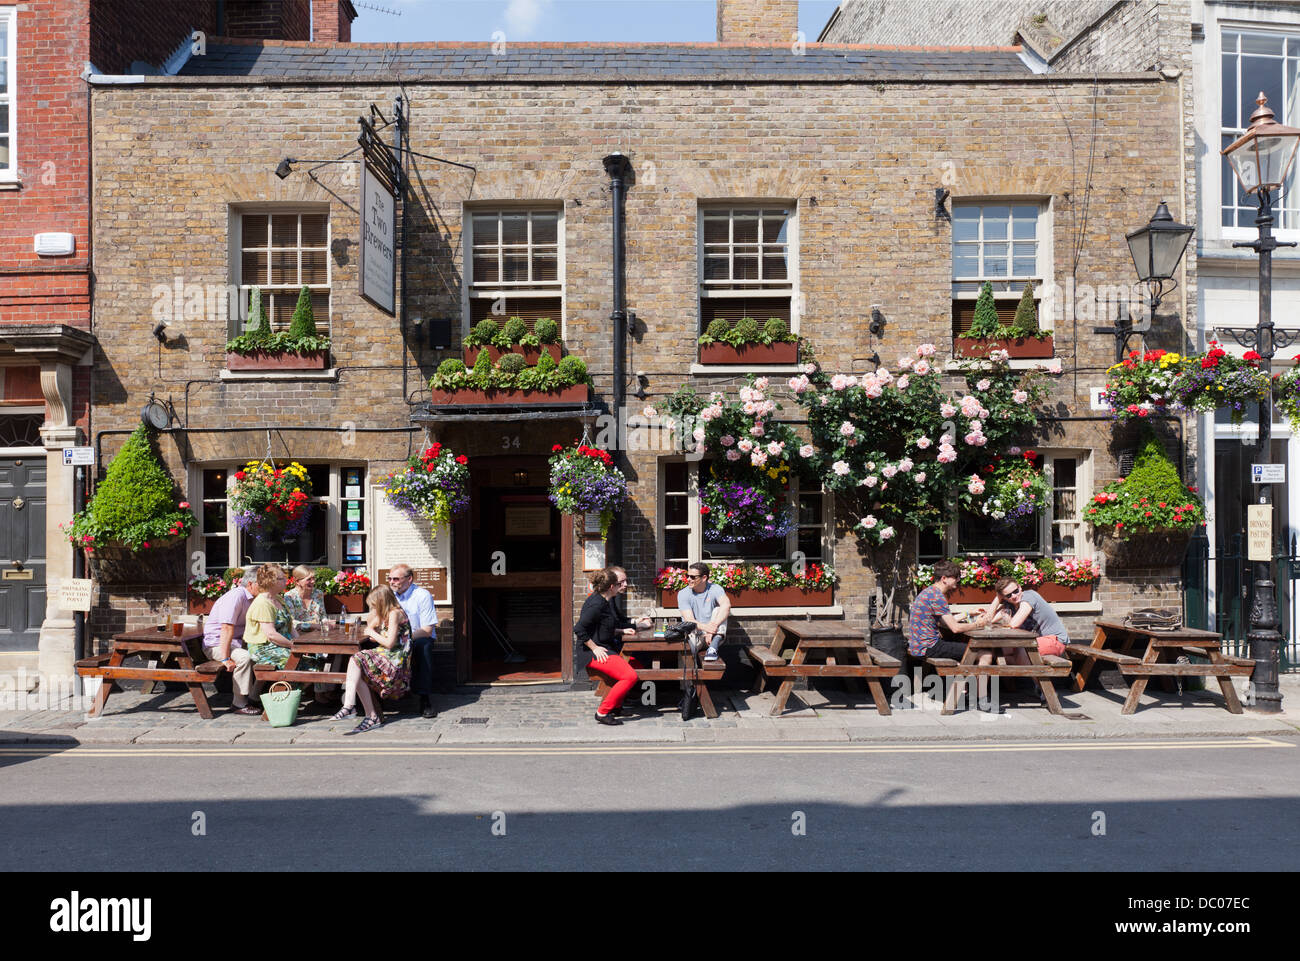 Typical old pub in the Berkshire town of Windsor, England. Stock Photo